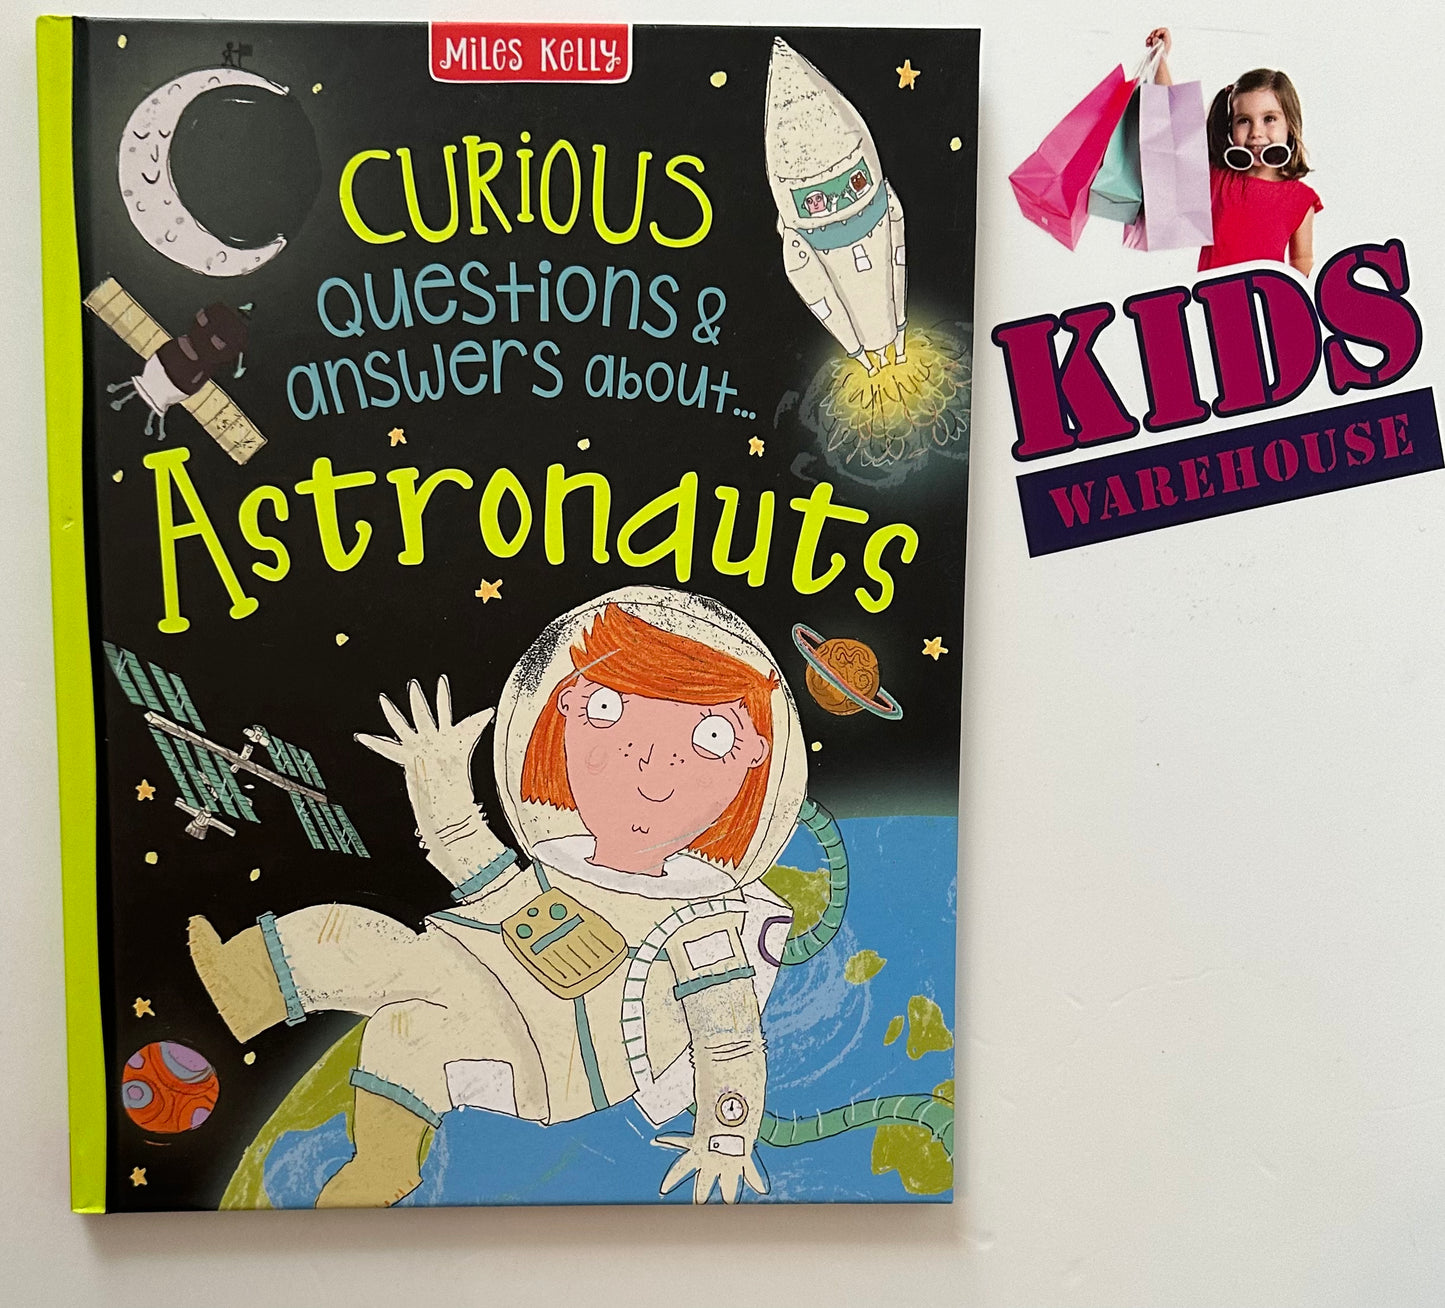 Curious Questions & Answers about Astronauts- Miles Kelly